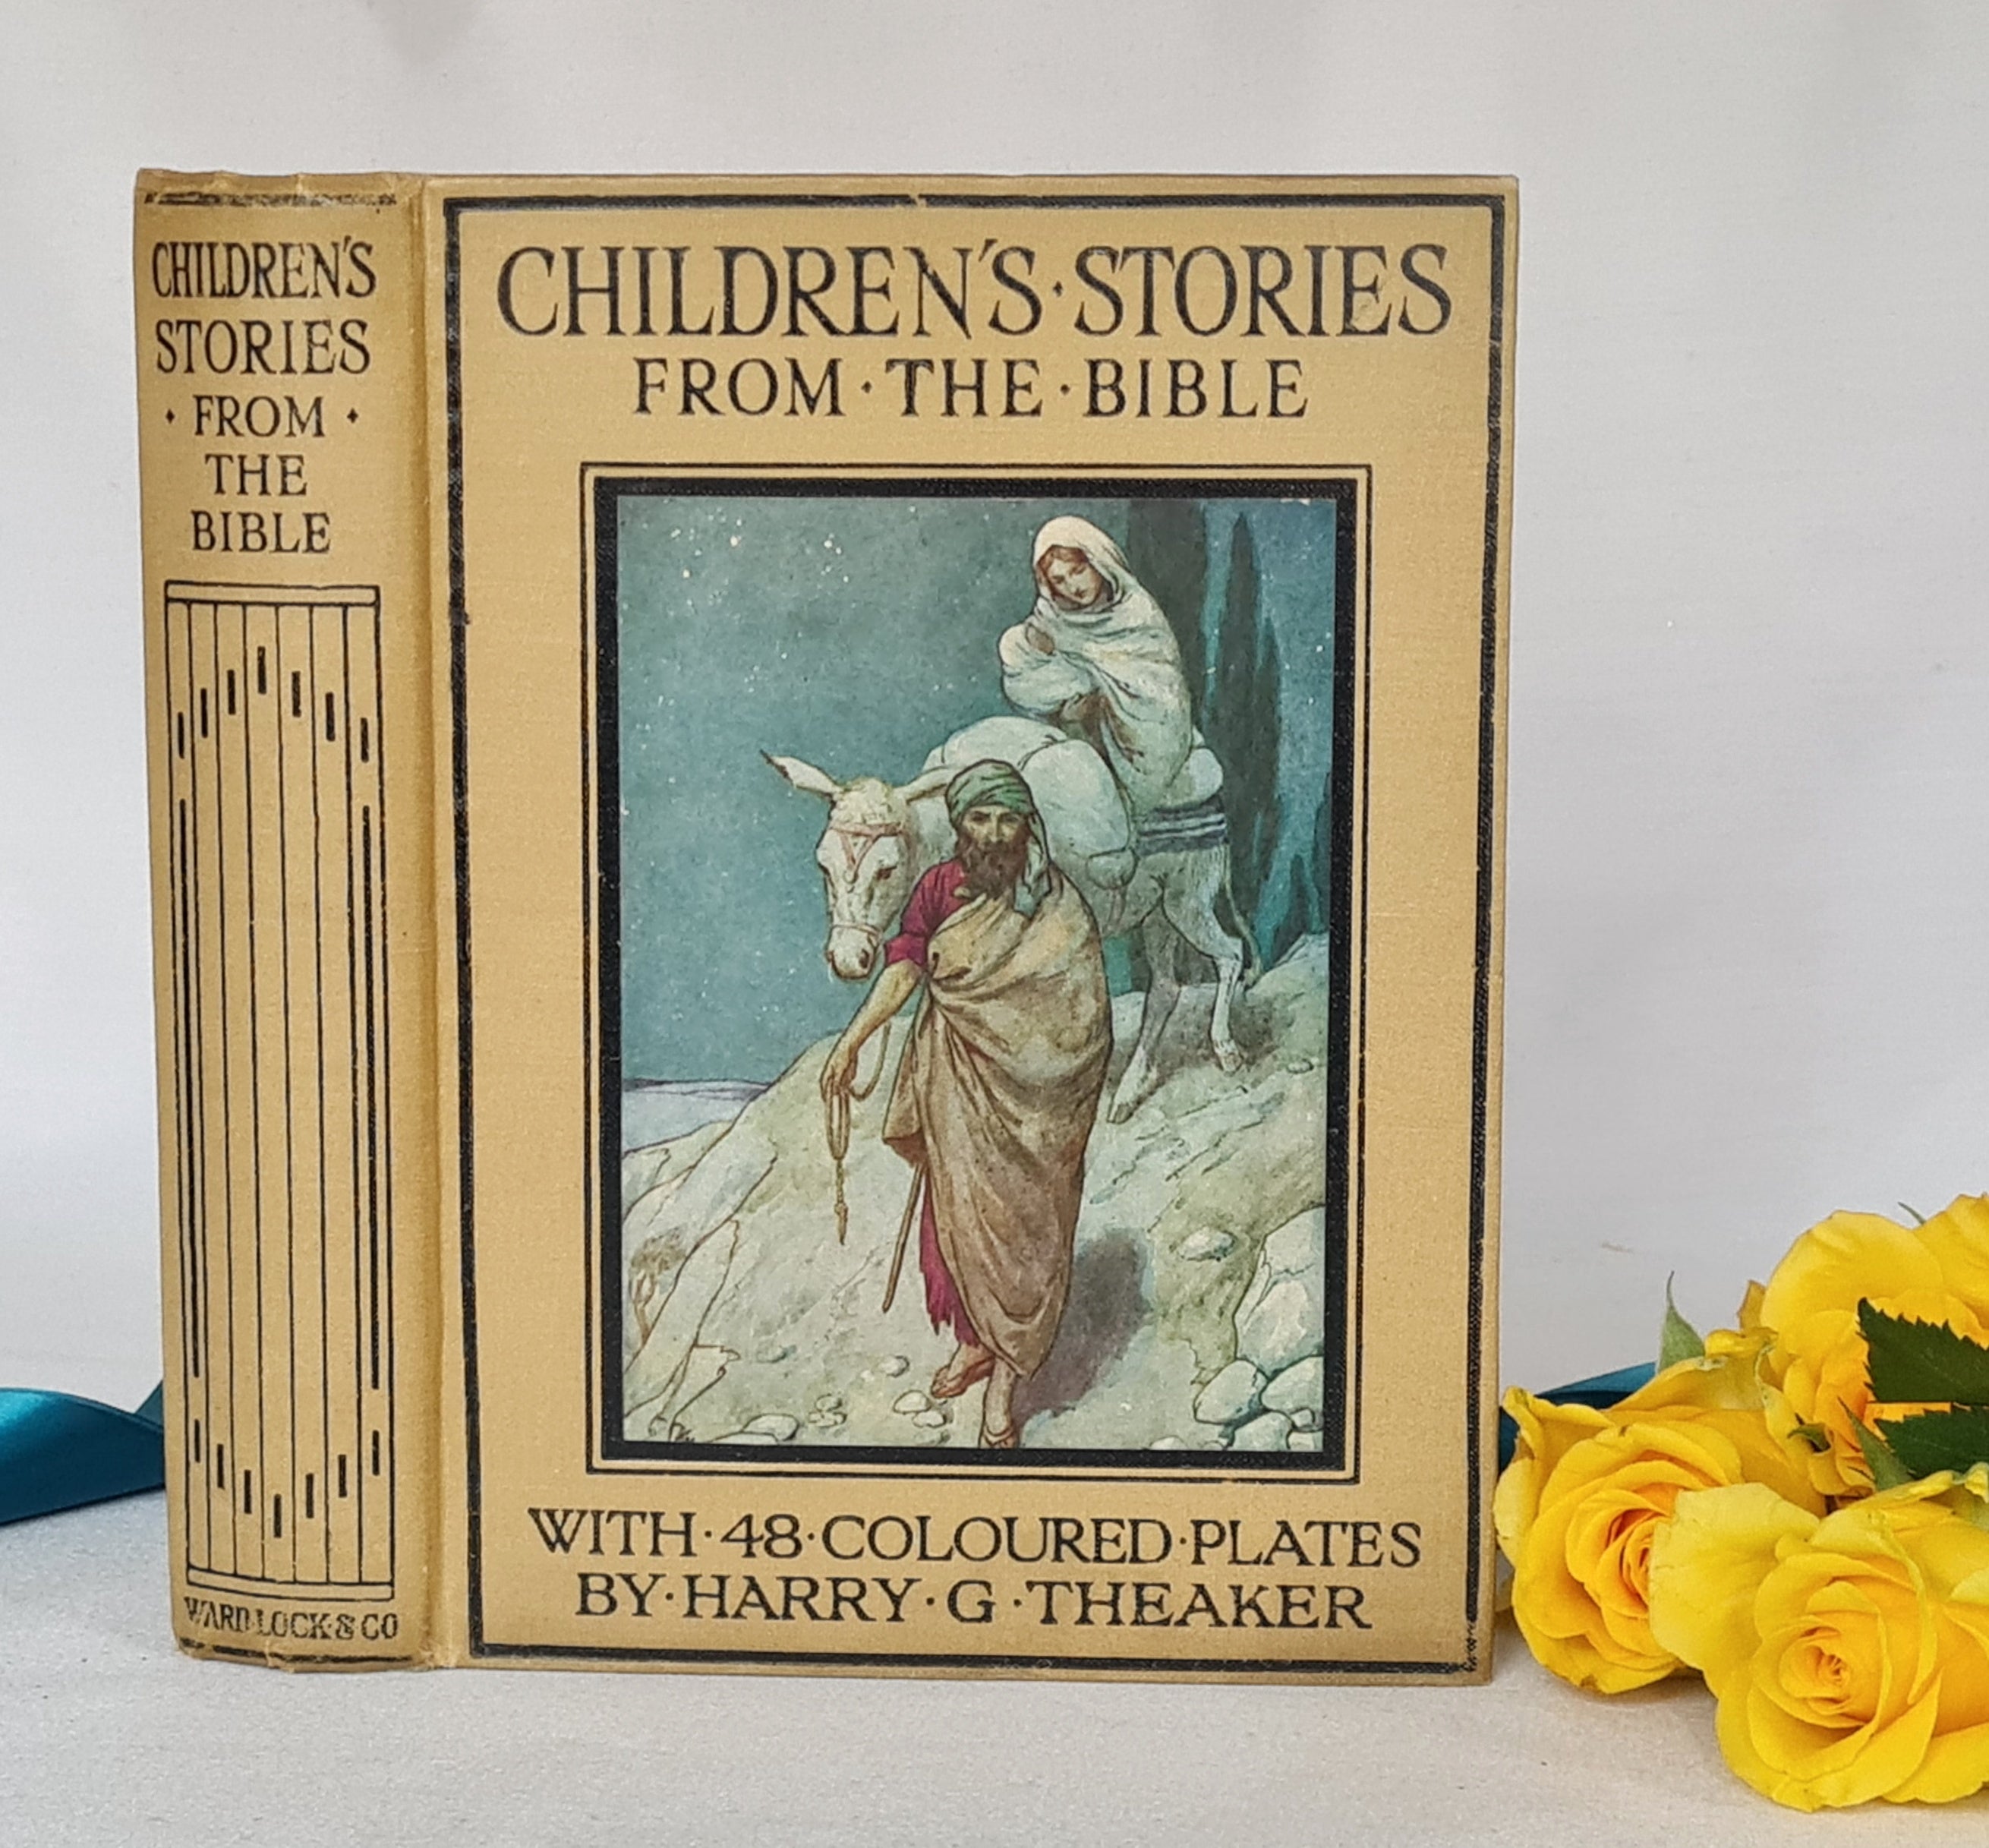 1925 Children's Stories From the Bible / Ward, Lock & Co. Ltd London / 48  Beautiful Colour Plates by Harry G Theaker / Antique Hardback Book